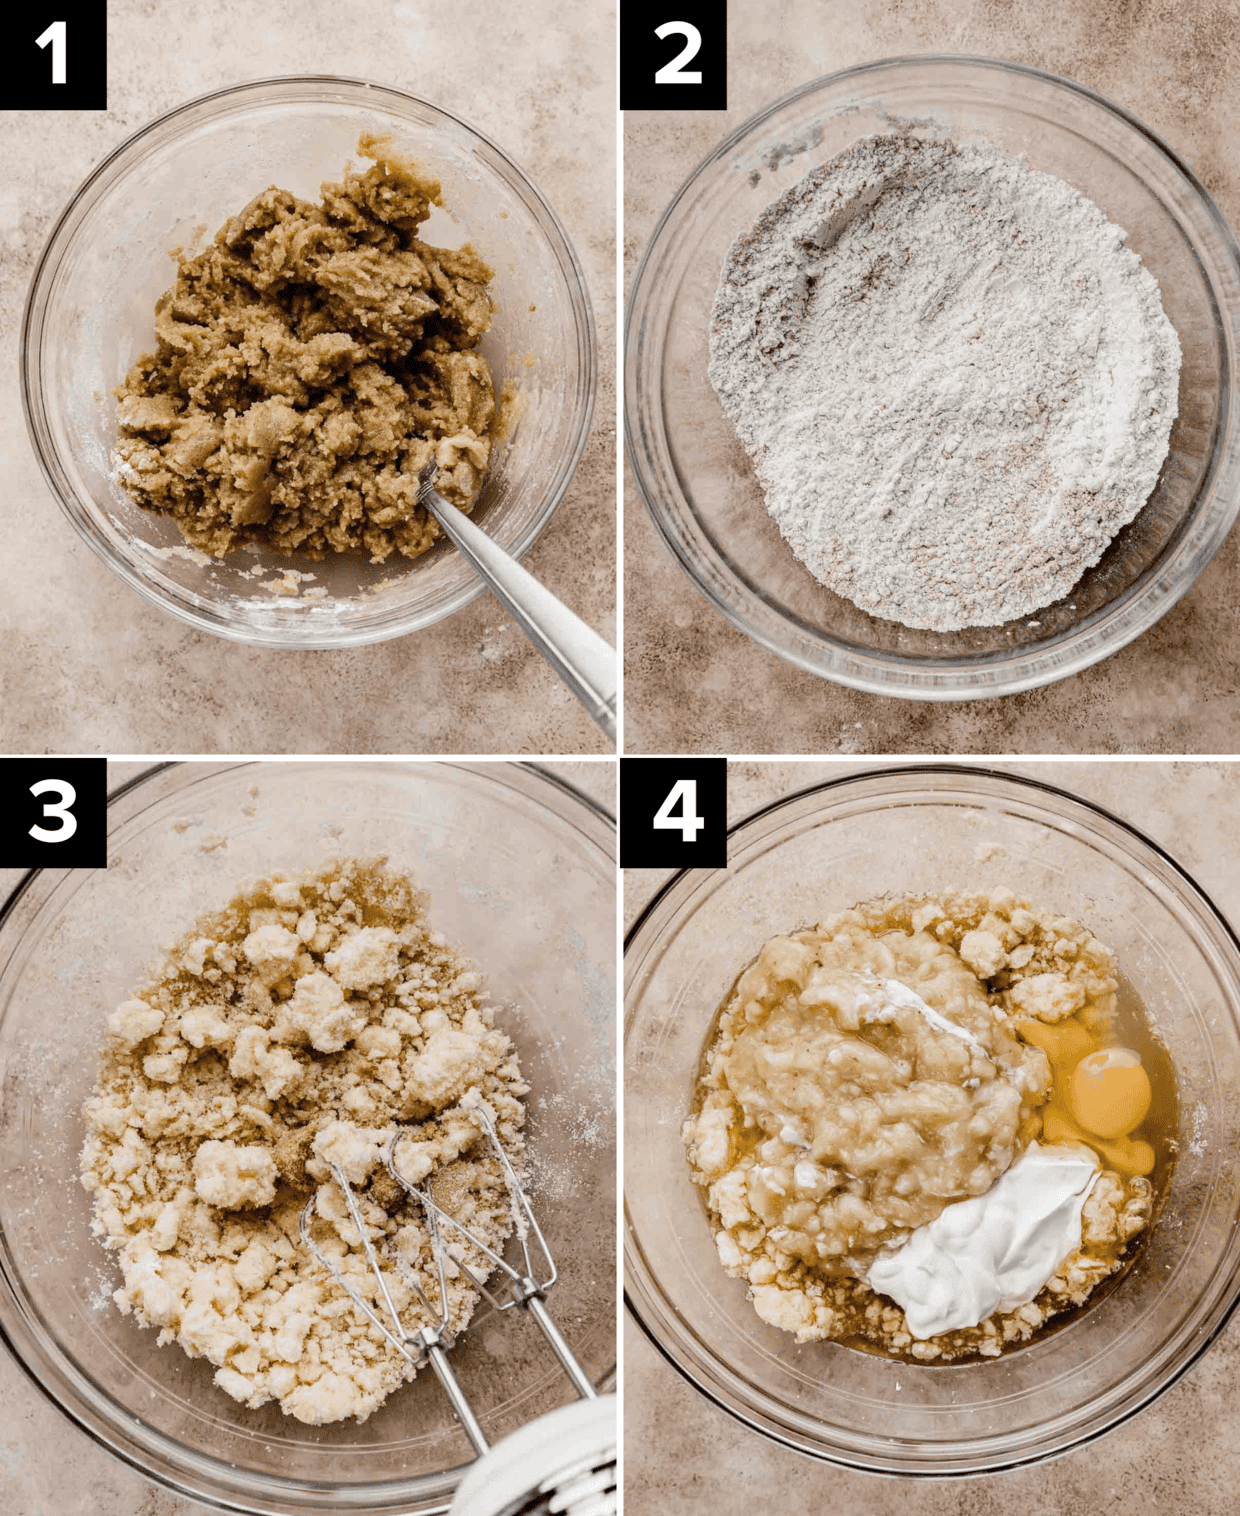 Four images showing how to make Banana Coffee Cake, top left is brown streusel mixture in glass bowl, top right is white flour and dry ingredients in glass bowl, bottom left photo is butter and sugar creamed in glass bowl, bottom right photo is mashed bananas, eggs, and oil in glass bowl.